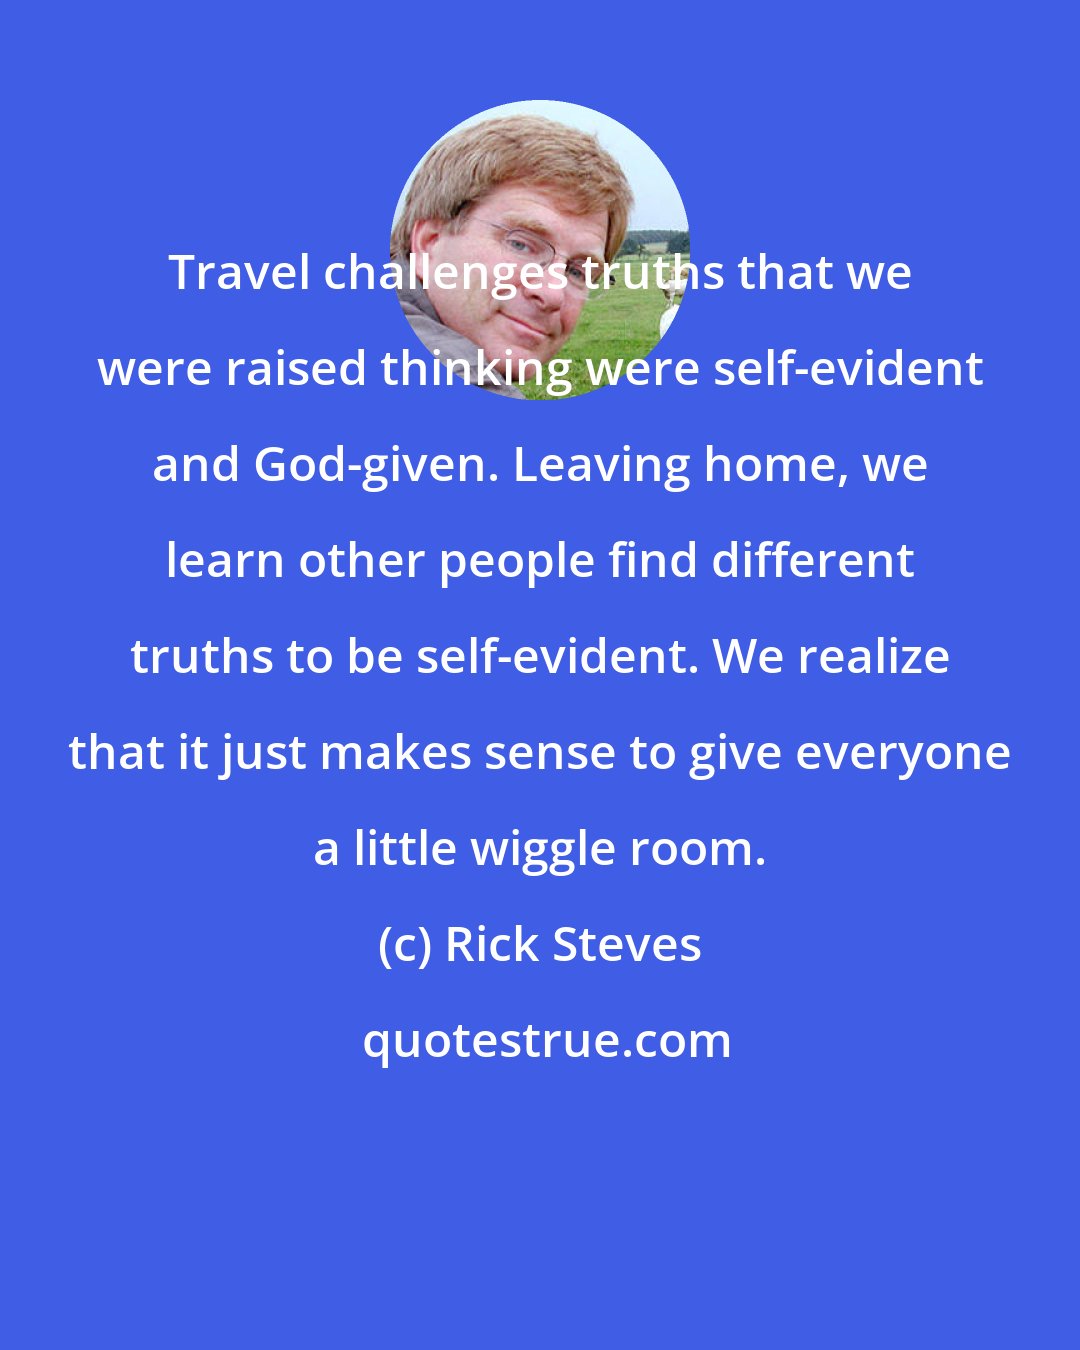 Rick Steves: Travel challenges truths that we were raised thinking were self-evident and God-given. Leaving home, we learn other people find different truths to be self-evident. We realize that it just makes sense to give everyone a little wiggle room.